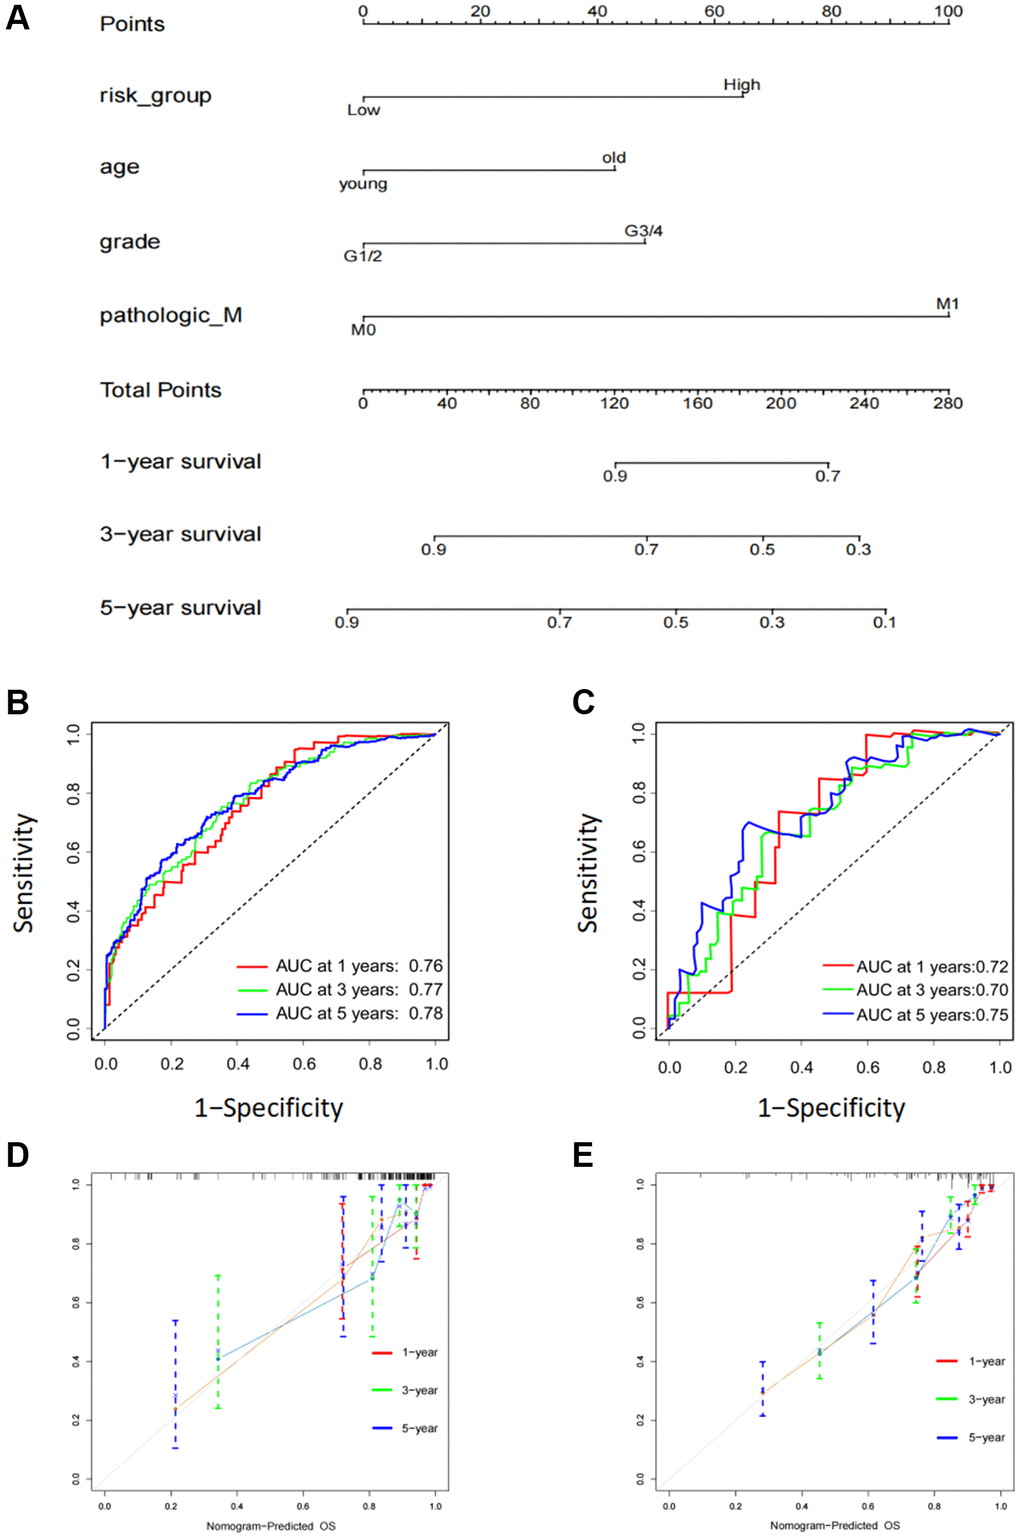 Construction of a six FOX family genes prognosis model-based nomogram. (A) A nomogram composed of clinicopathological factors including age, gender, age, M stage, as well as risk scores. (B) AUC values of nomogram at 1, 3, and 5 year OS in the TCGA cohorts. (C) AUC values of nomogram at 1, 3, and 5 year OS in the ICGC cohorts. (D) The calibration curves of nomogram in the TCGA cohorts. (E) The calibration curves of nomogram in the ICGC cohorts.